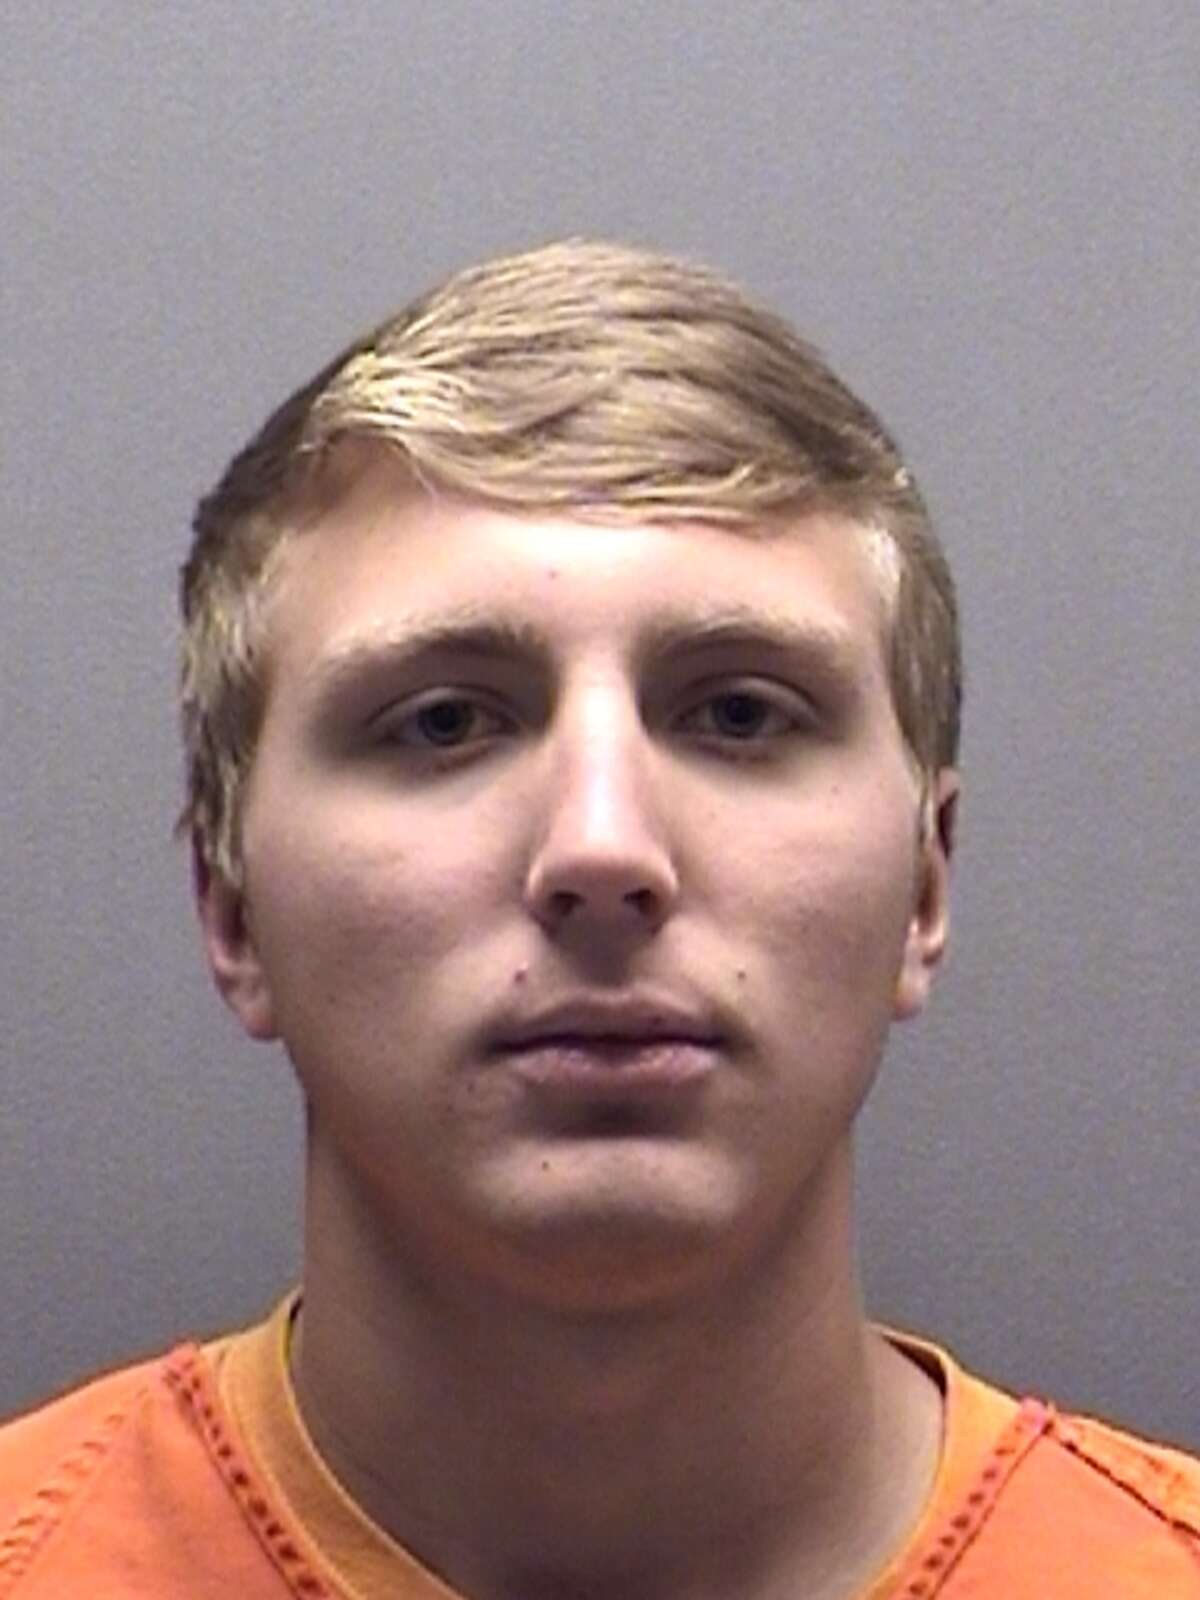 John Rutowski, 18, was arrested for sexual assault in a hazing scandal out of La Vernia, Texas involving members of the high school football, basketball and baseball teams.